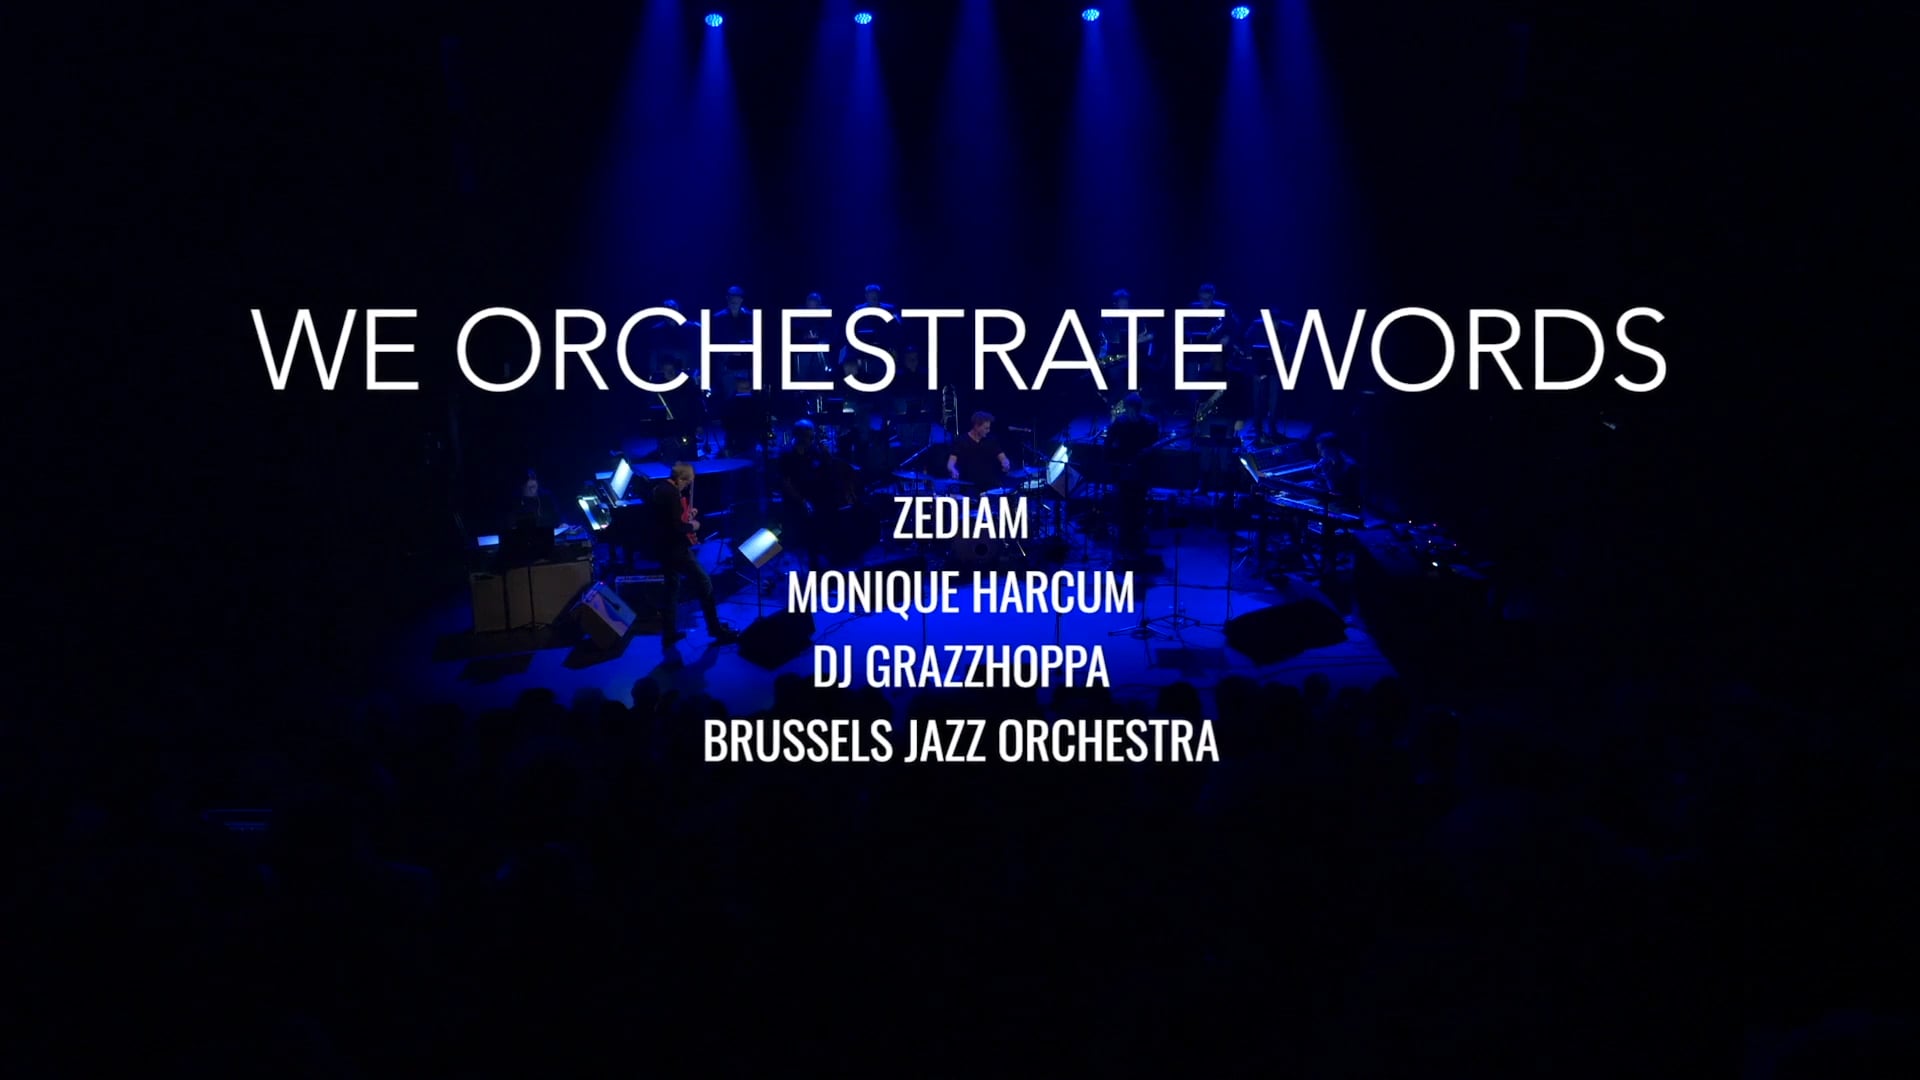 Brussels Jazz Orchestra - We Orchestrate Words (Teaser)